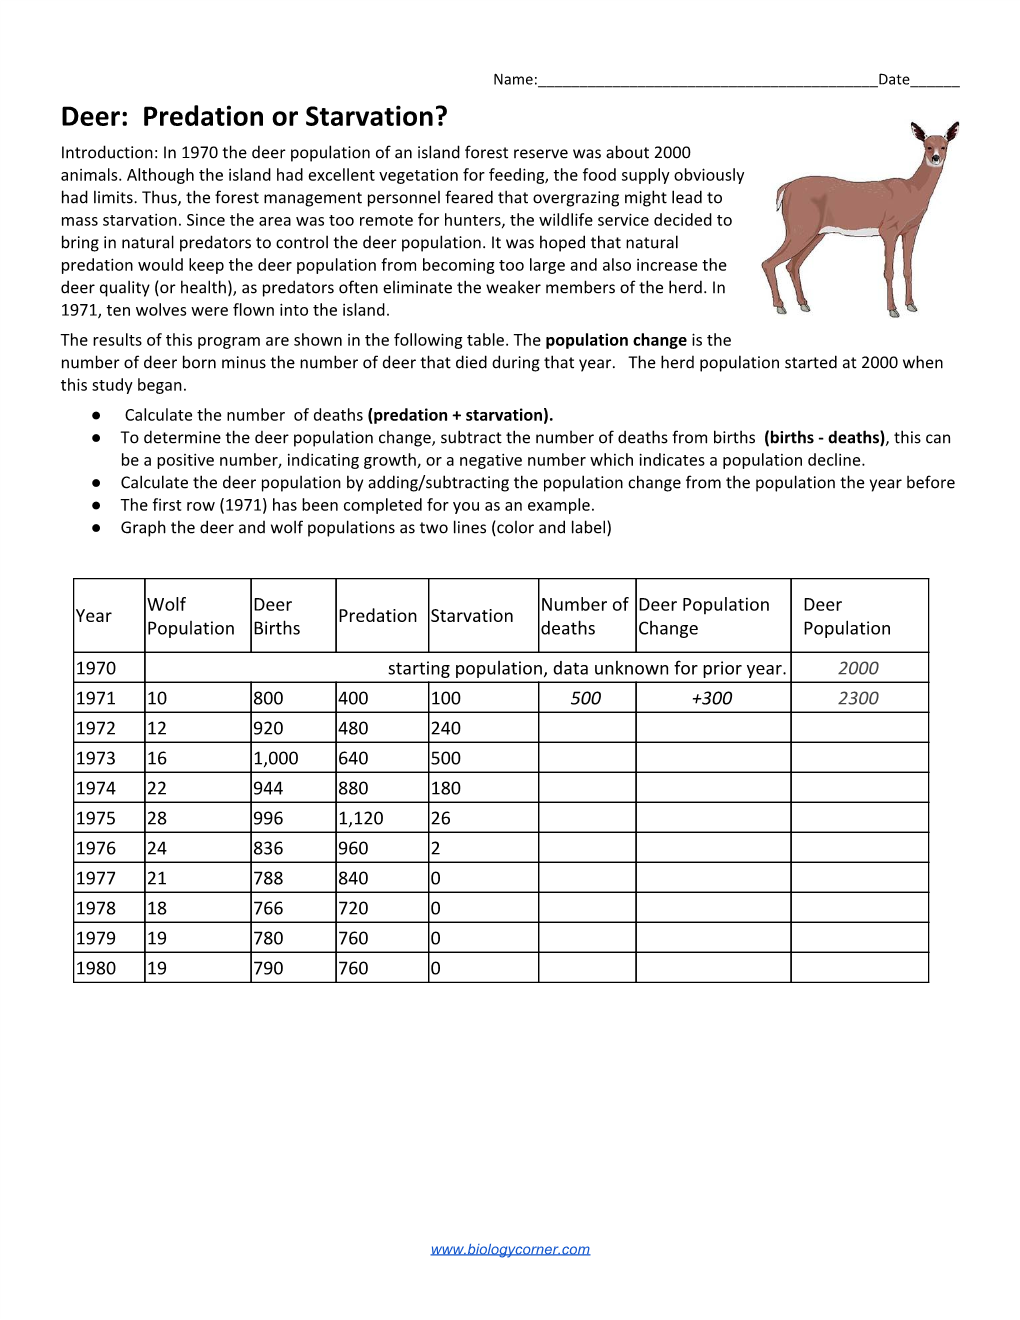 Deer: Predation Or Starvation? Introduction: in 1970 the Deer Population of an Island Forest Reserve Was About 2000 Animals